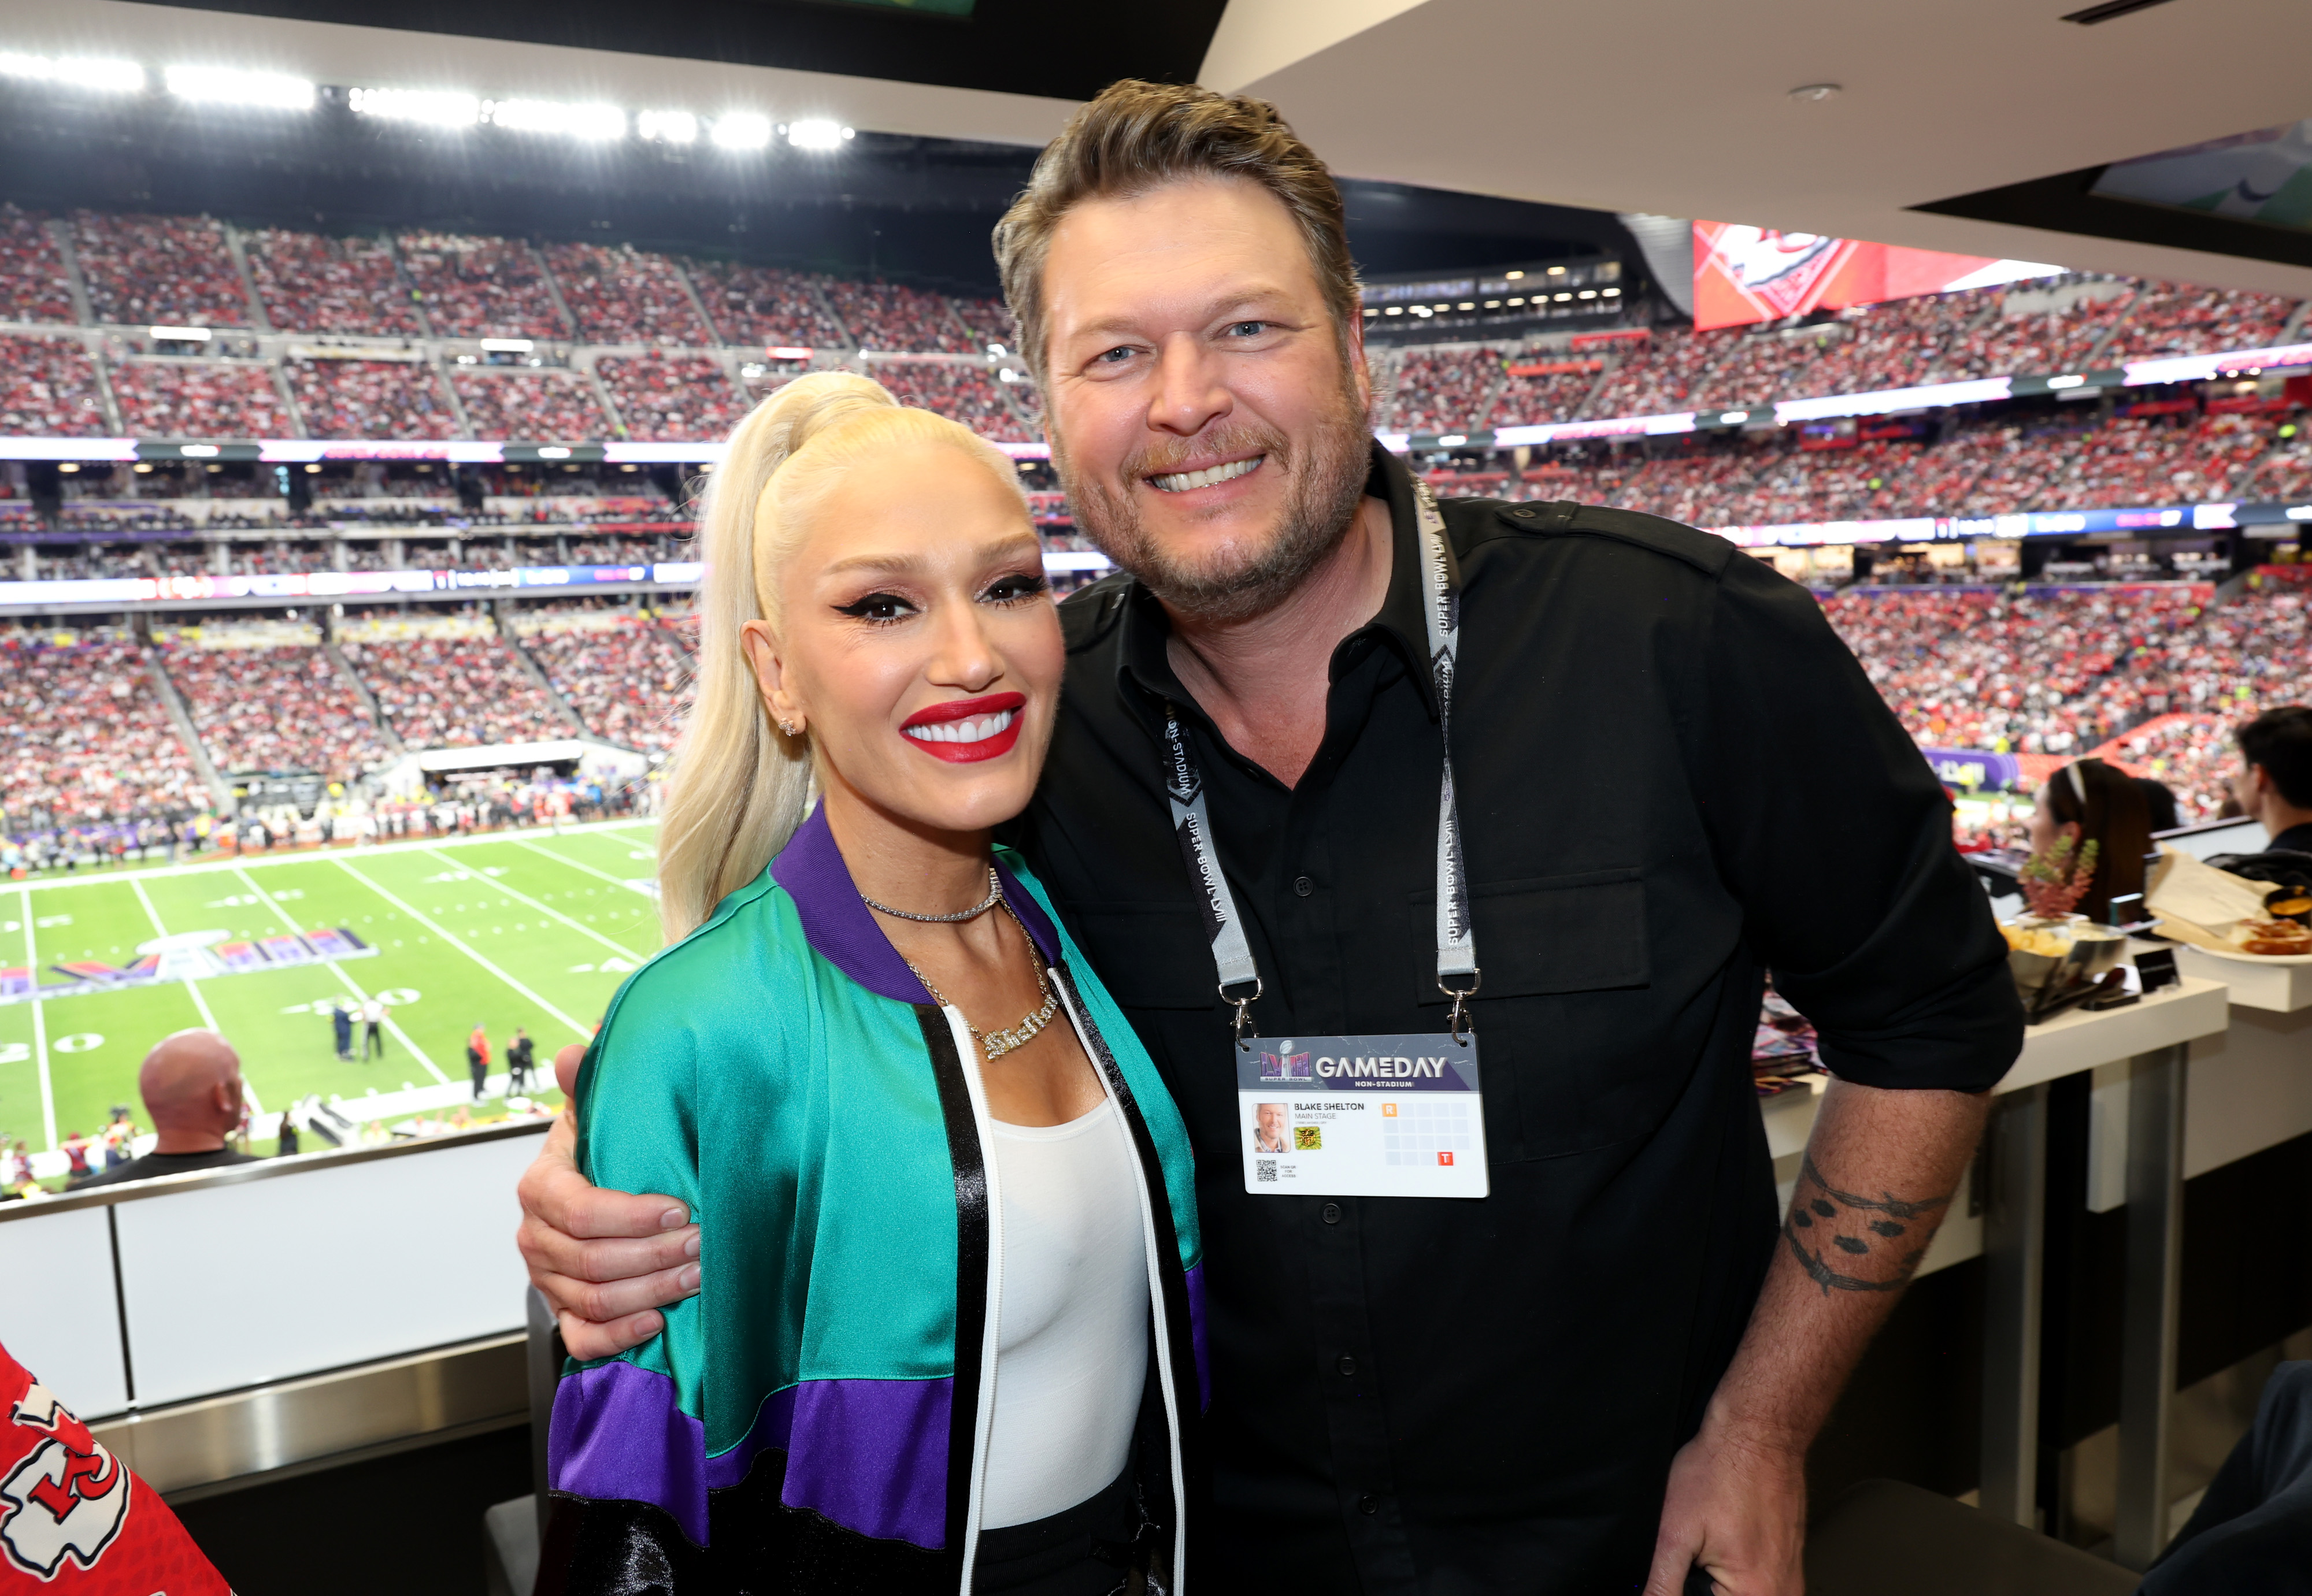 Gwen has been joining Blake on his Back to the Honky Tonk tour for special appearances amid recent divorce rumors